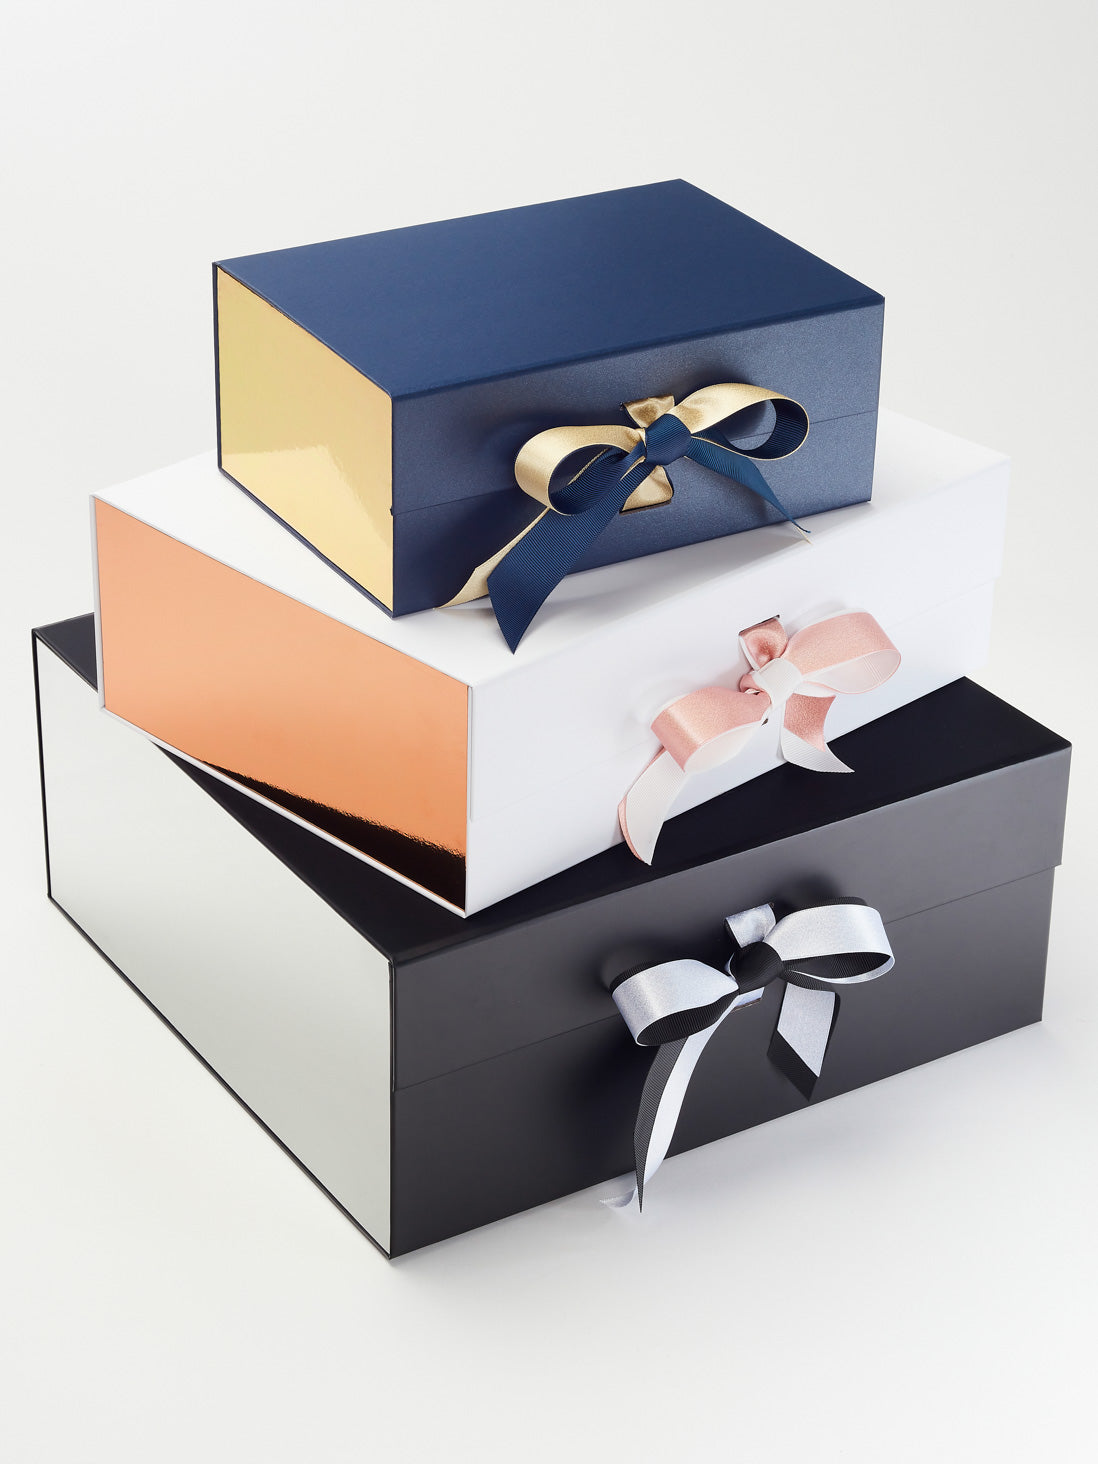 Custom Large and Oversize Gift Boxes with Lids 